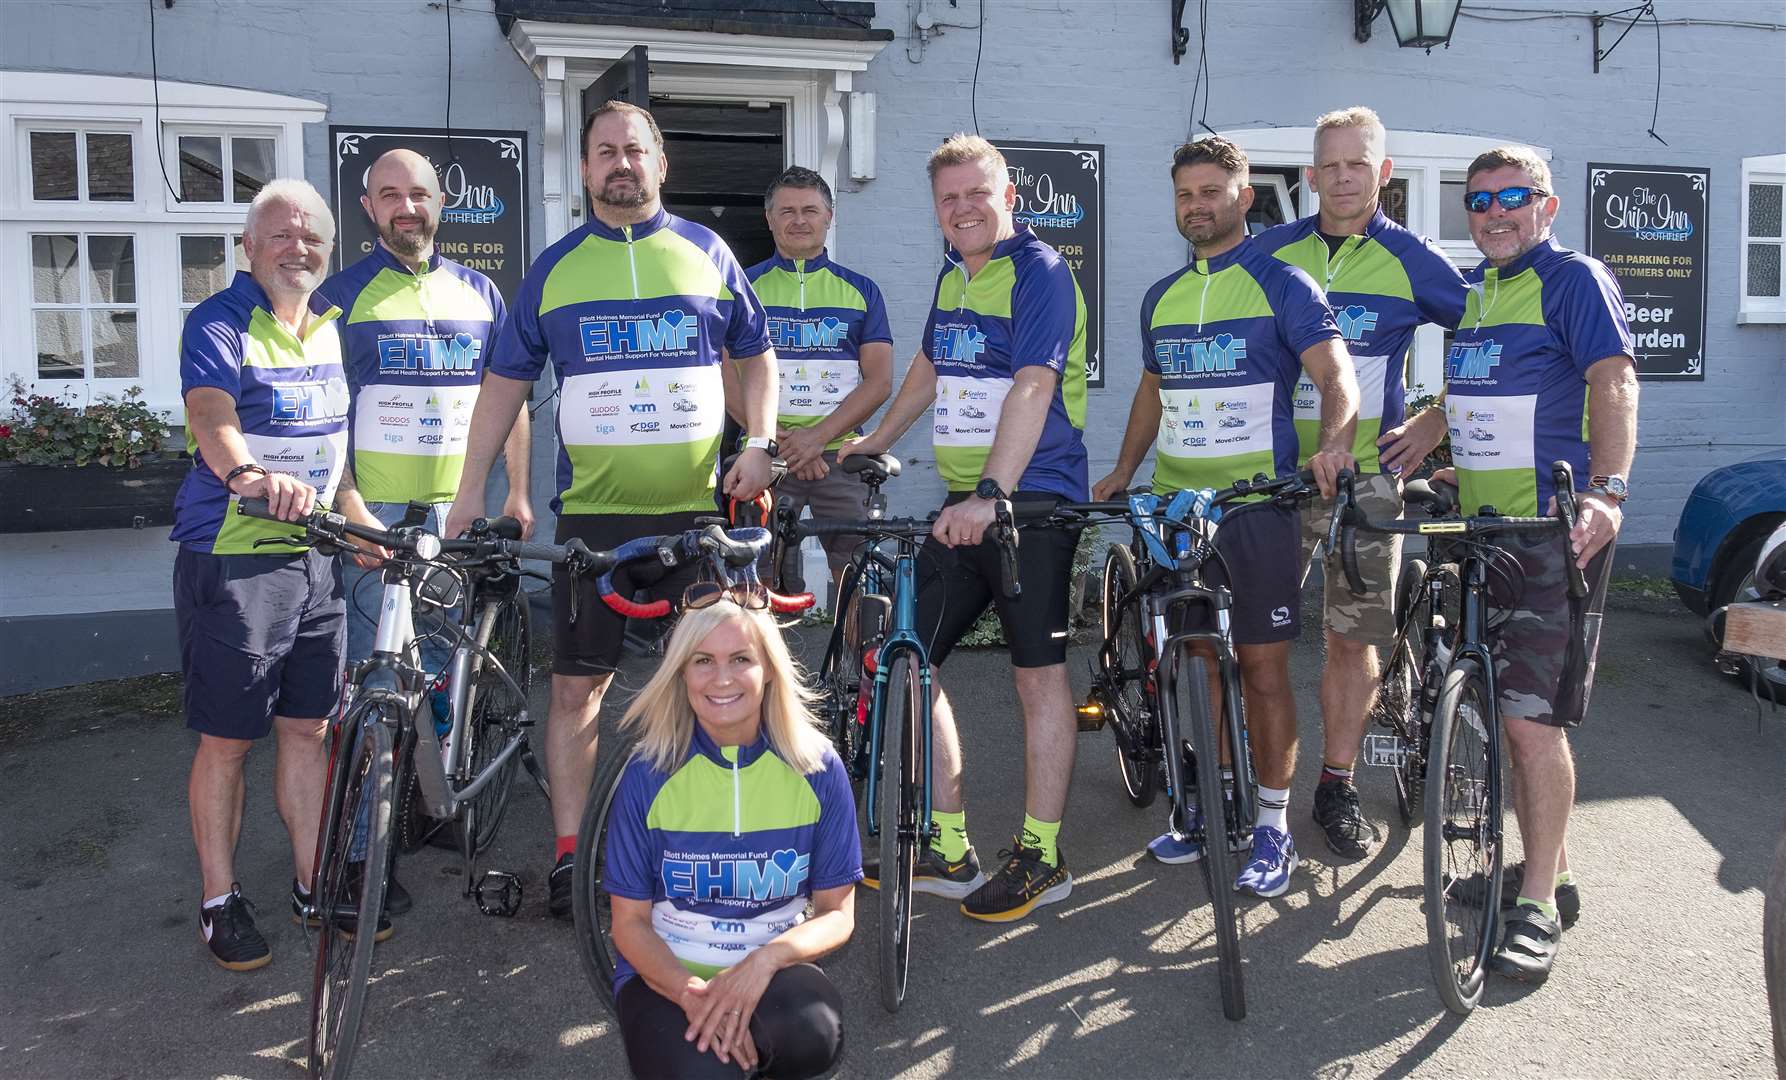 Seven of the 18 riders, outside event sponsort The Ship Inn at Southfleet. Left to right: Peter Scutts, Dan Ferla, Richard Brown, Kerry Holmes (front), Glenn Holmes, Nick Hedley, Warren D’rosario, Chris Warden from Move2Clear and Eamon Fanning. Photo: EHMF